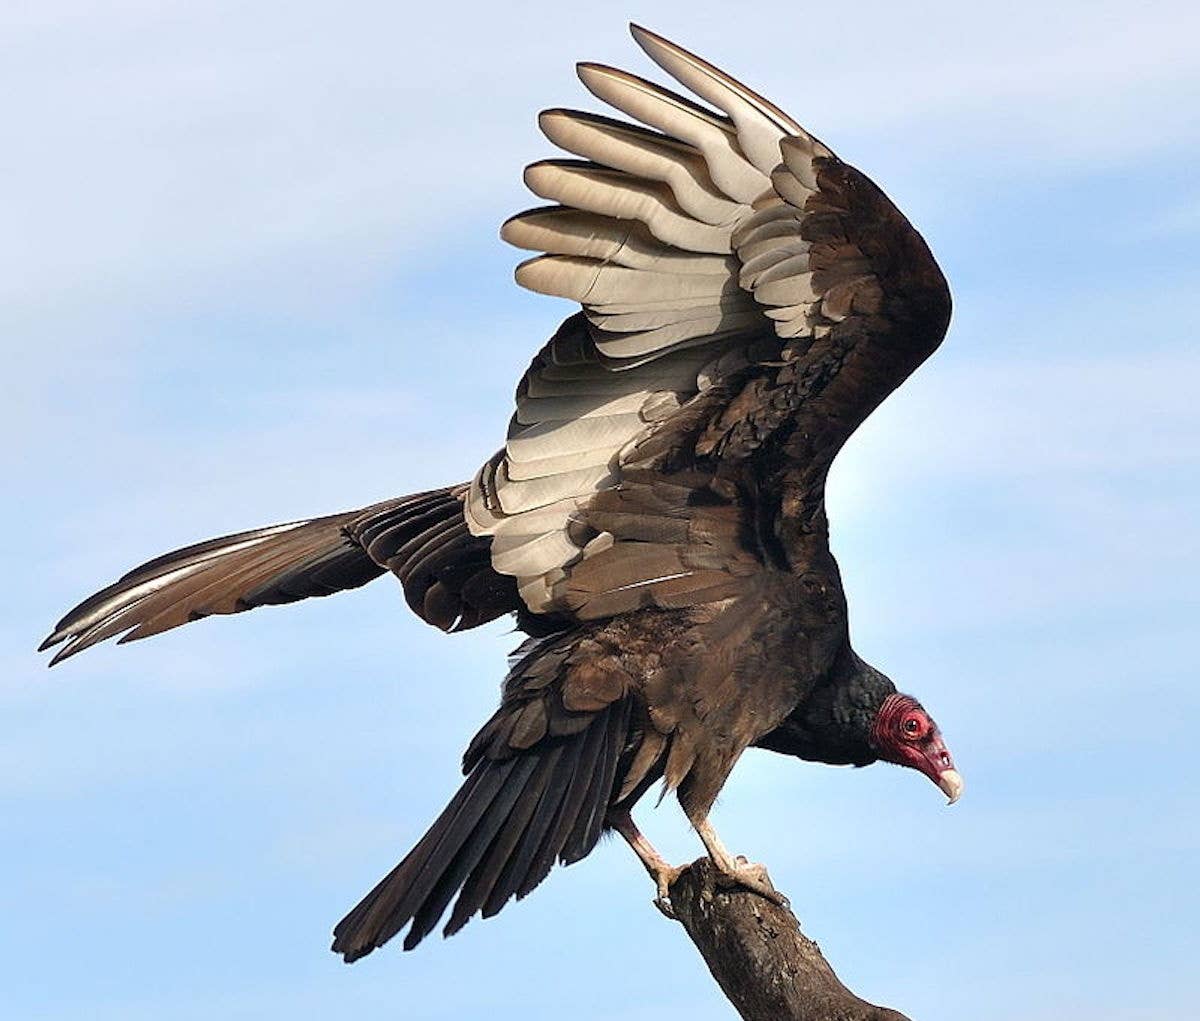 Vultures are taking over a Customs and Border Protection radio tower